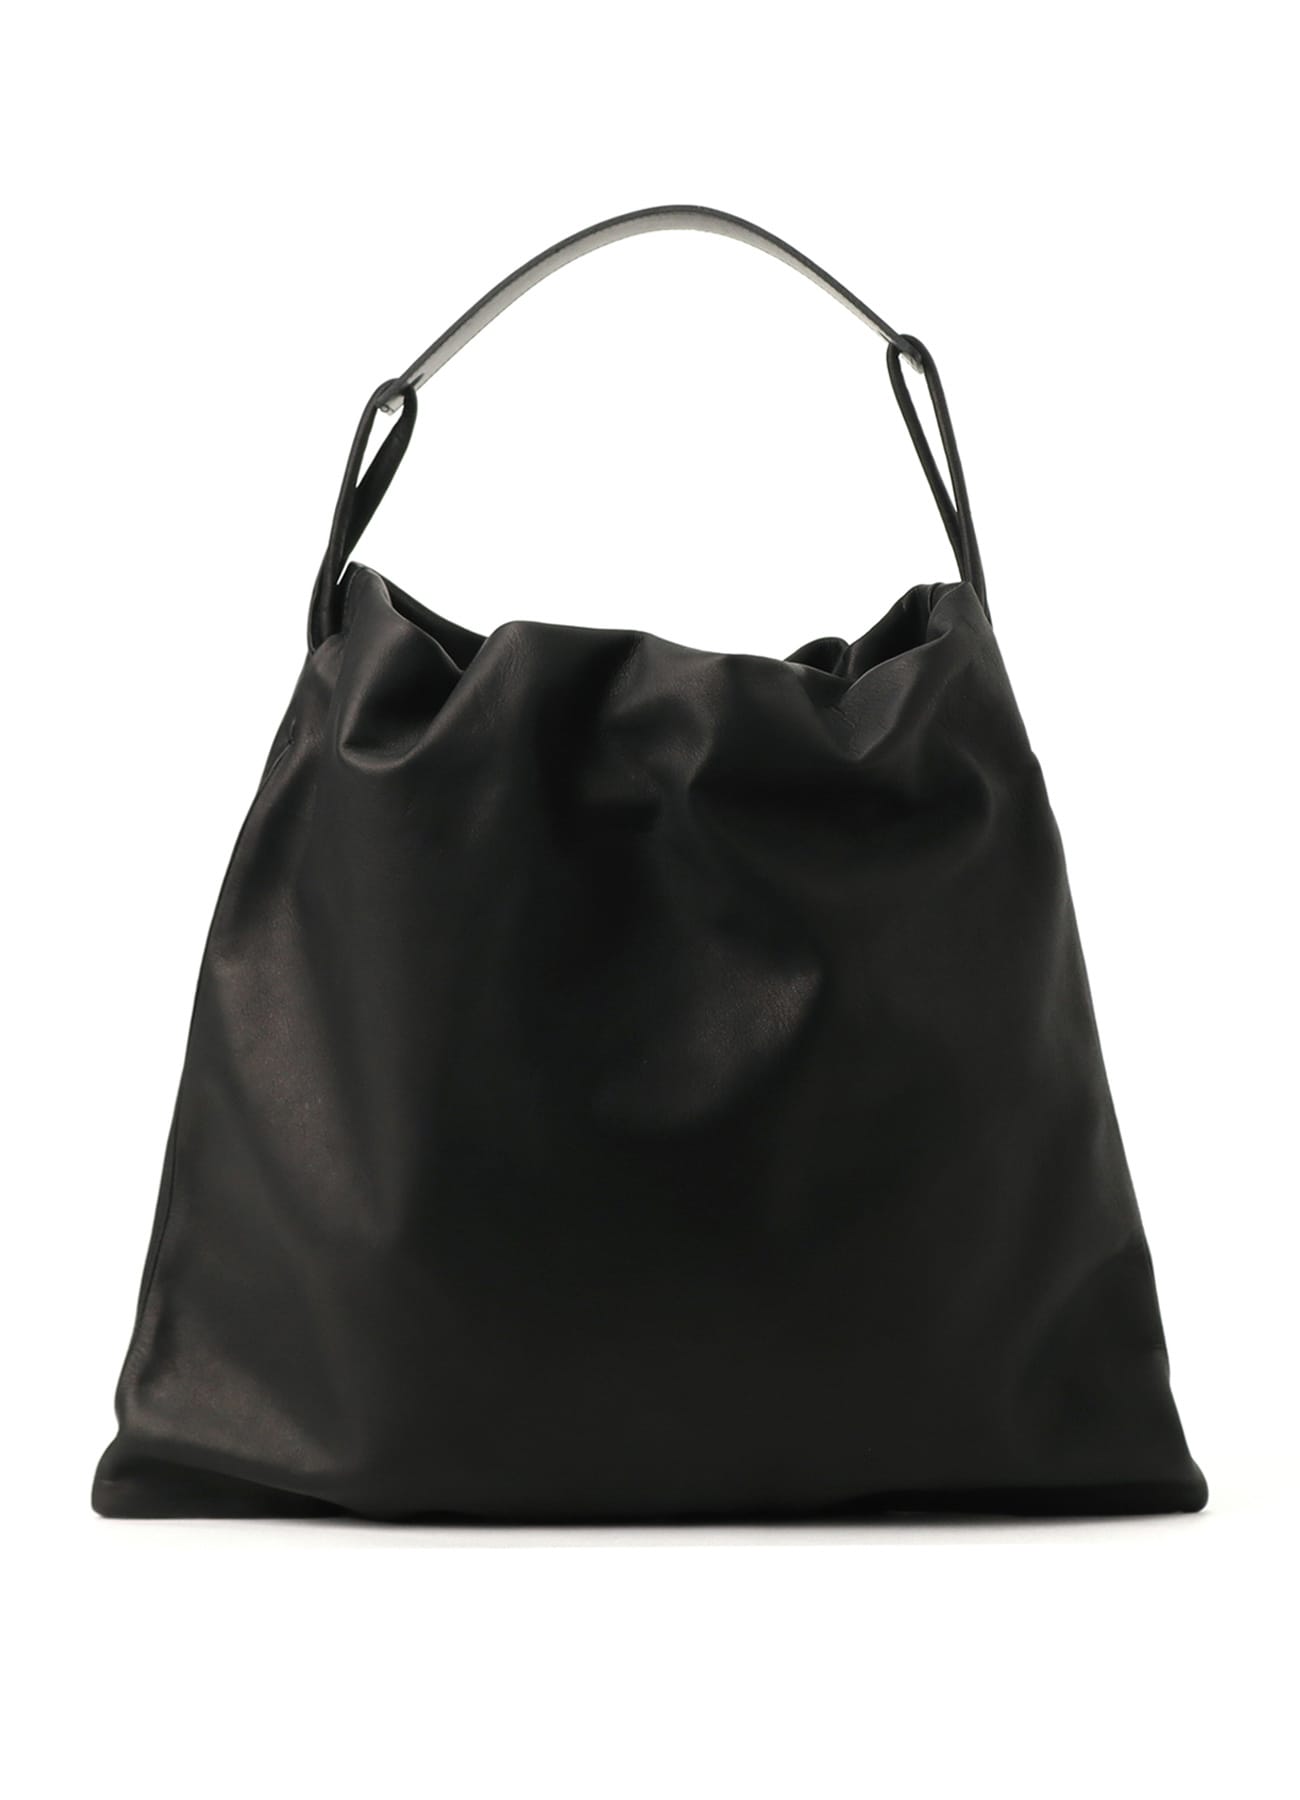 SOFT SMOOTH LEATHER TOTE BAG